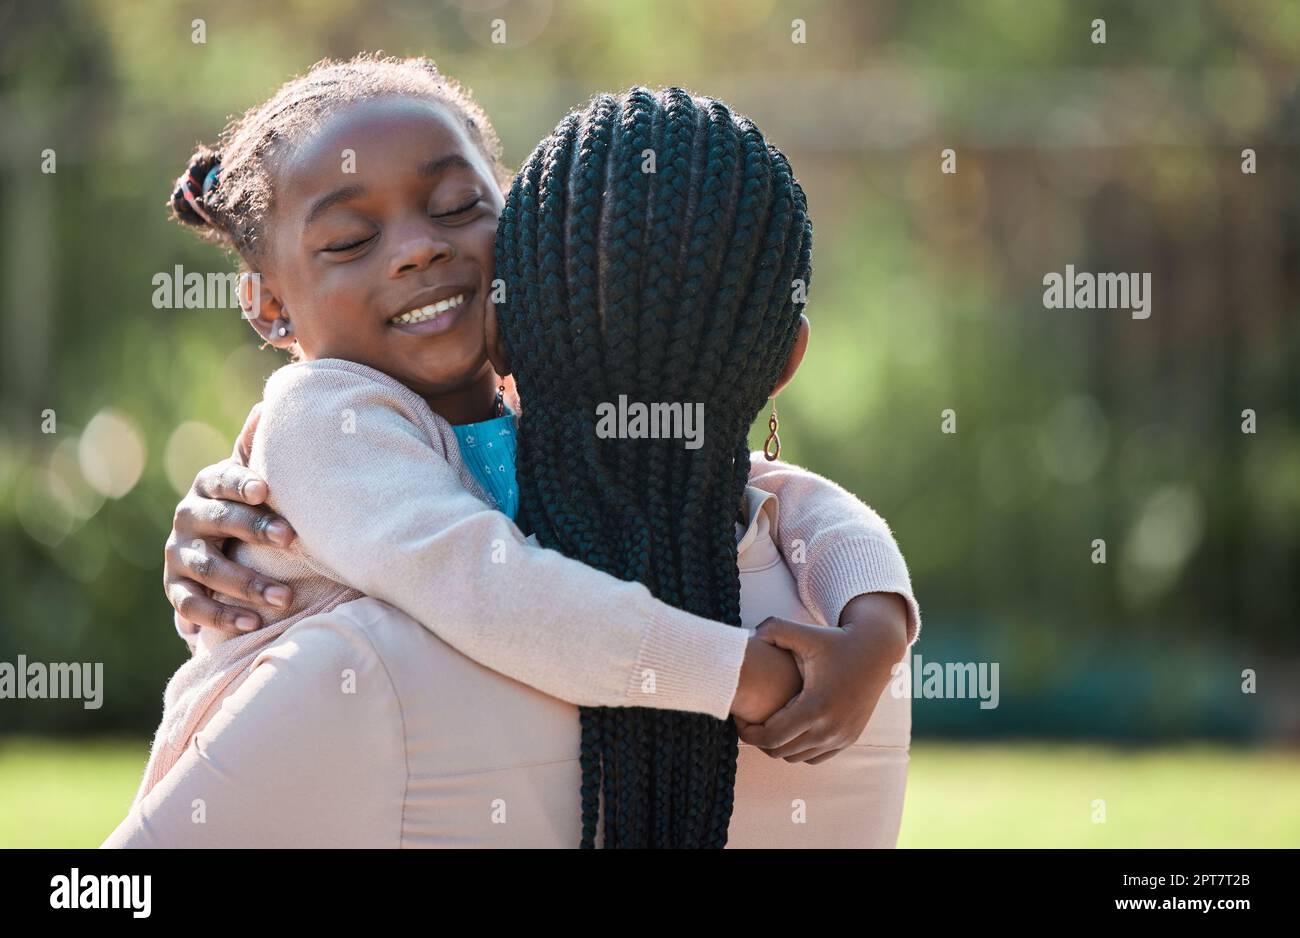 Everyone deserves to feel loved. an adorable little girl spending the day outdoors with her mother Stock Photo